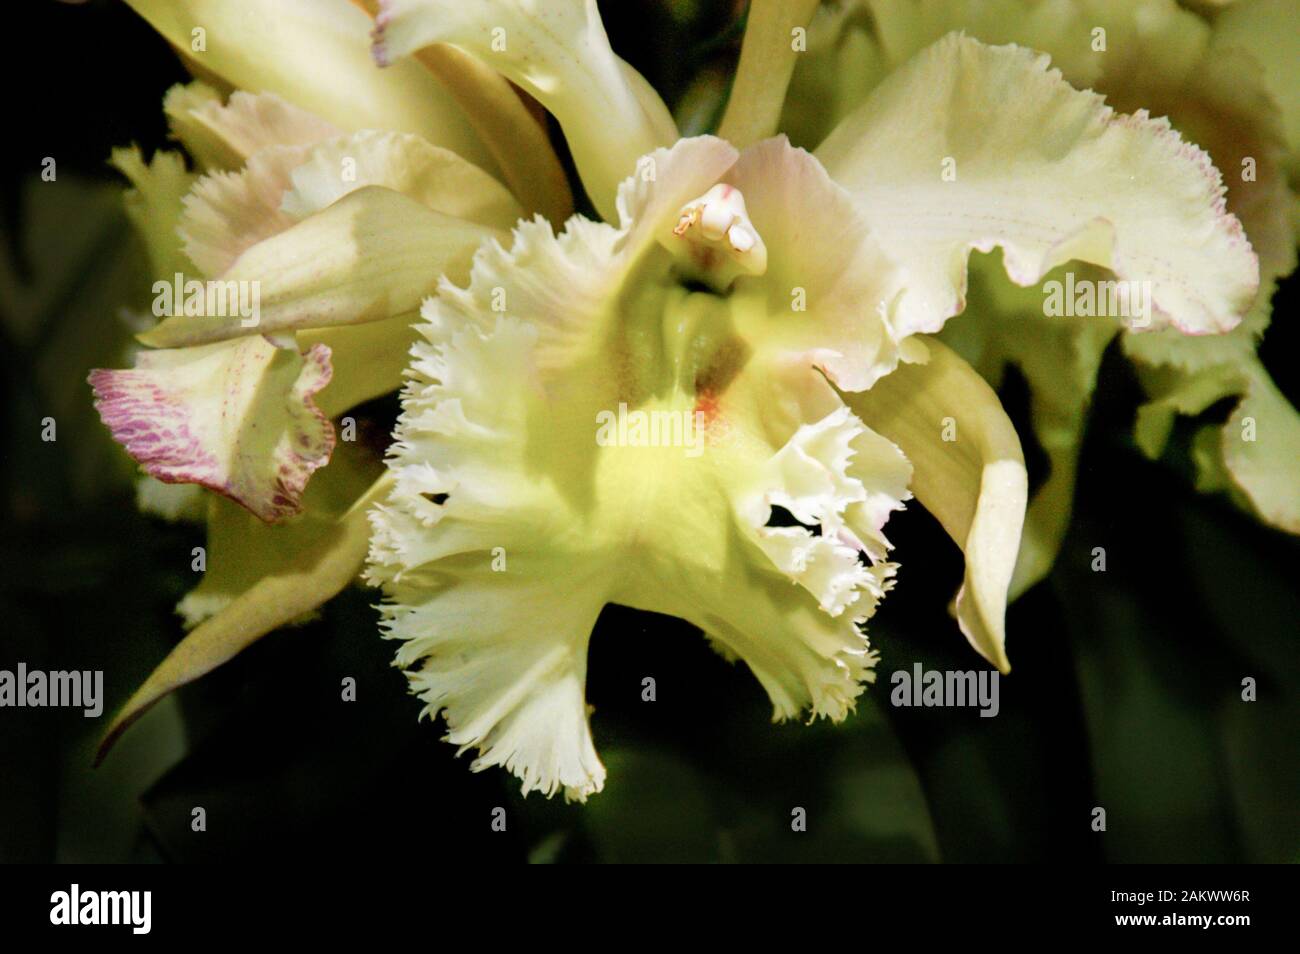 off center yellow orchid cluster close up with soft background Stock Photo